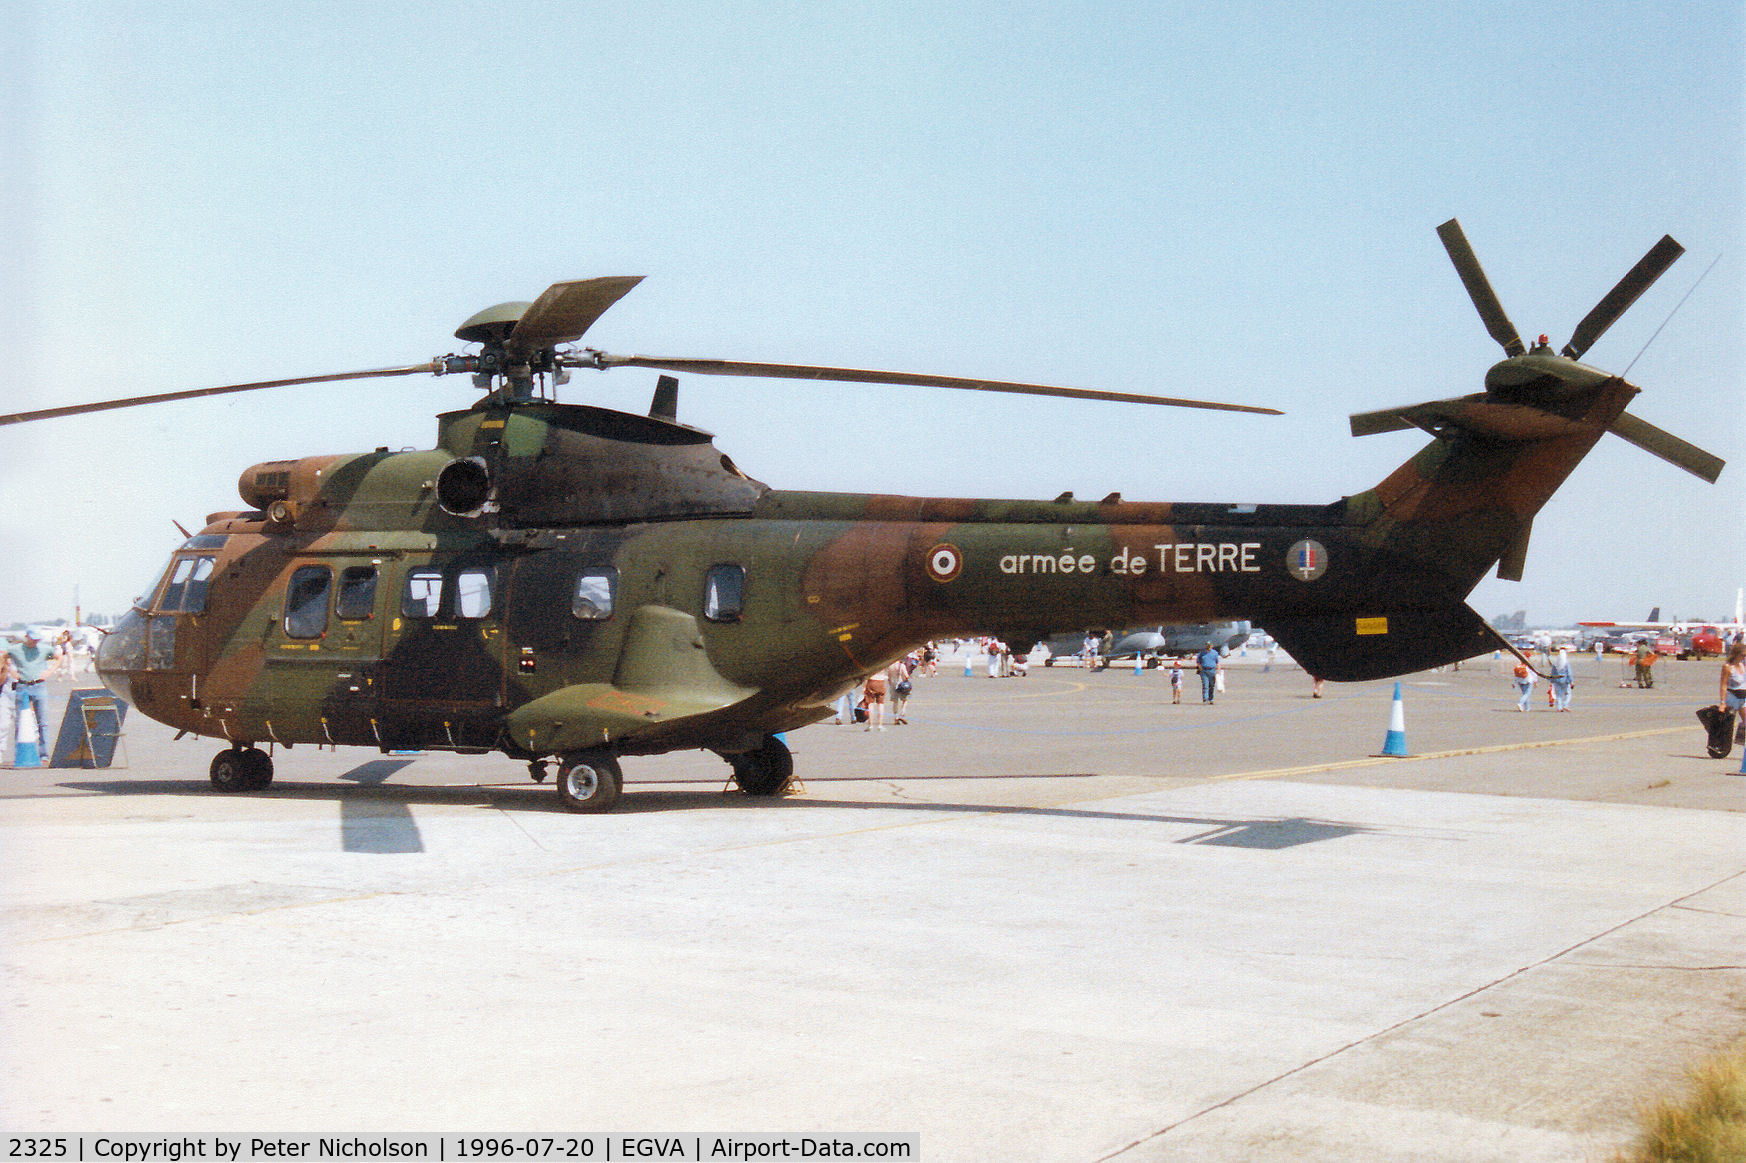 2325, Aérospatiale AS-532UL Cougar C/N 2325, AS-532UL Cougar of 4 RHCM of the French Army on display at the 1996 Royal Intnl Air Tattoo at RAF Fairford.